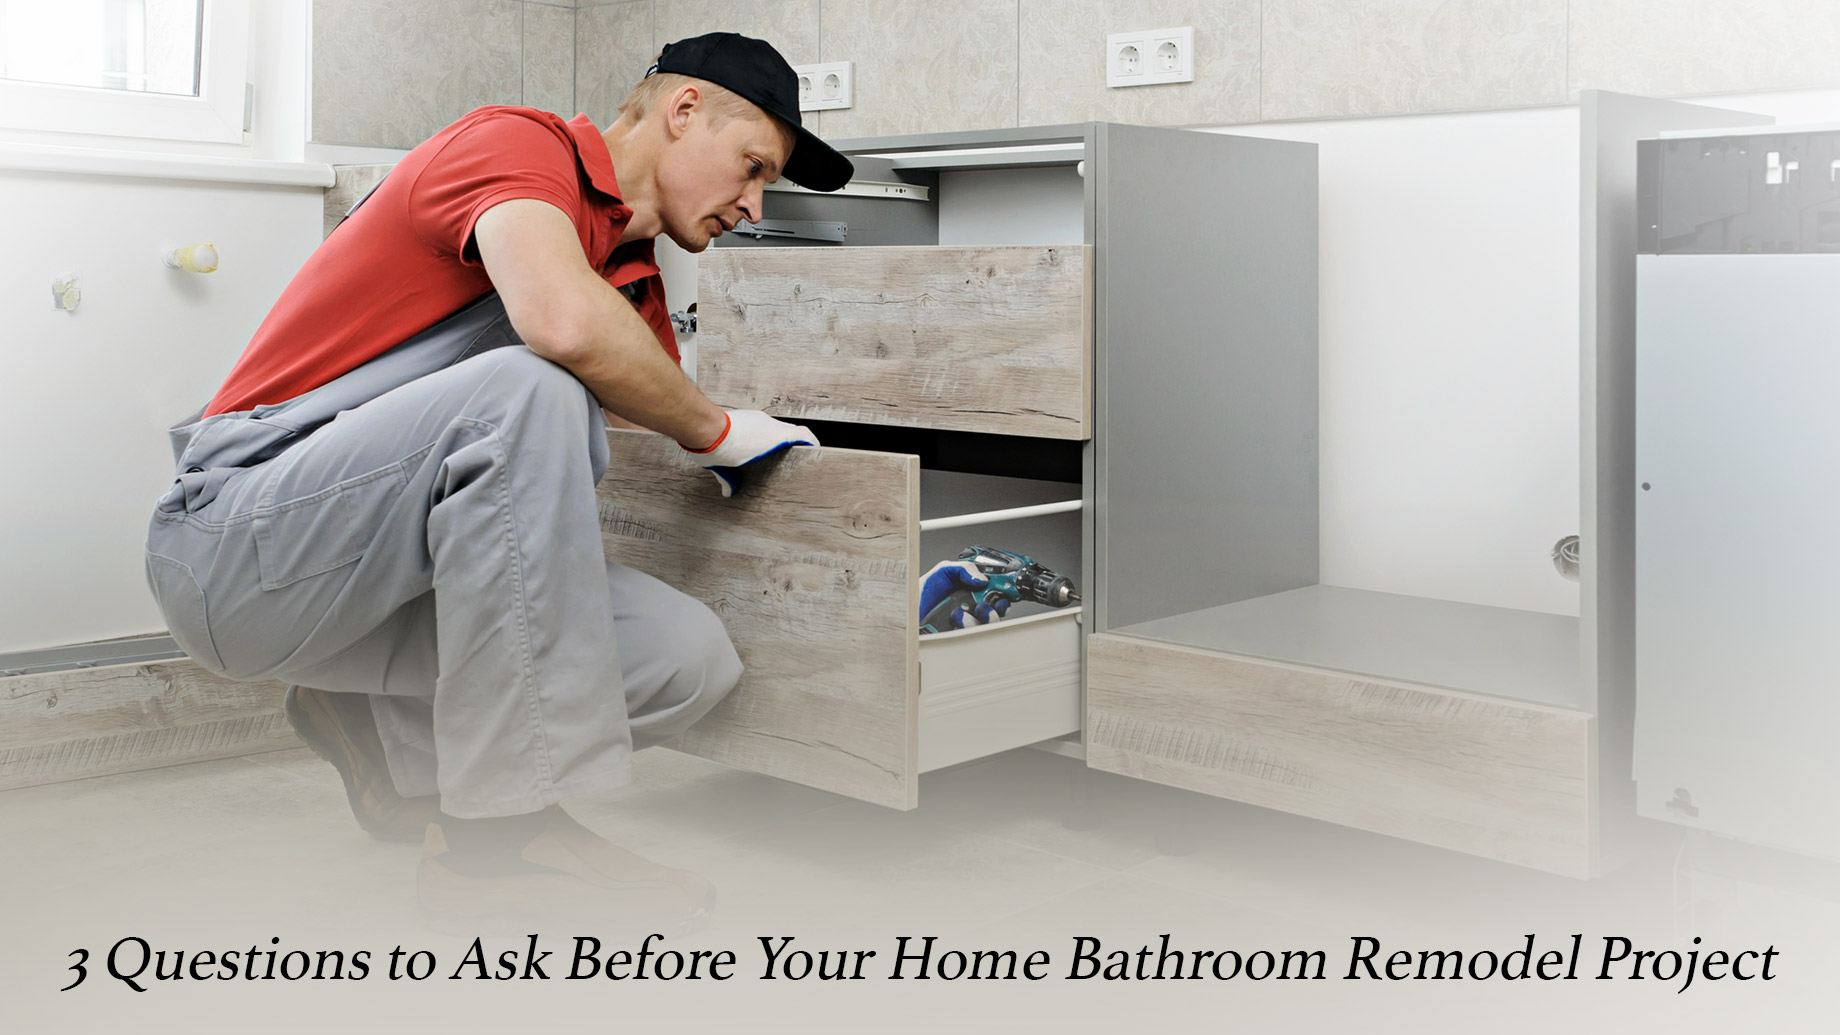 3 Questions to Ask Before Your Home Bathroom Remodel Project